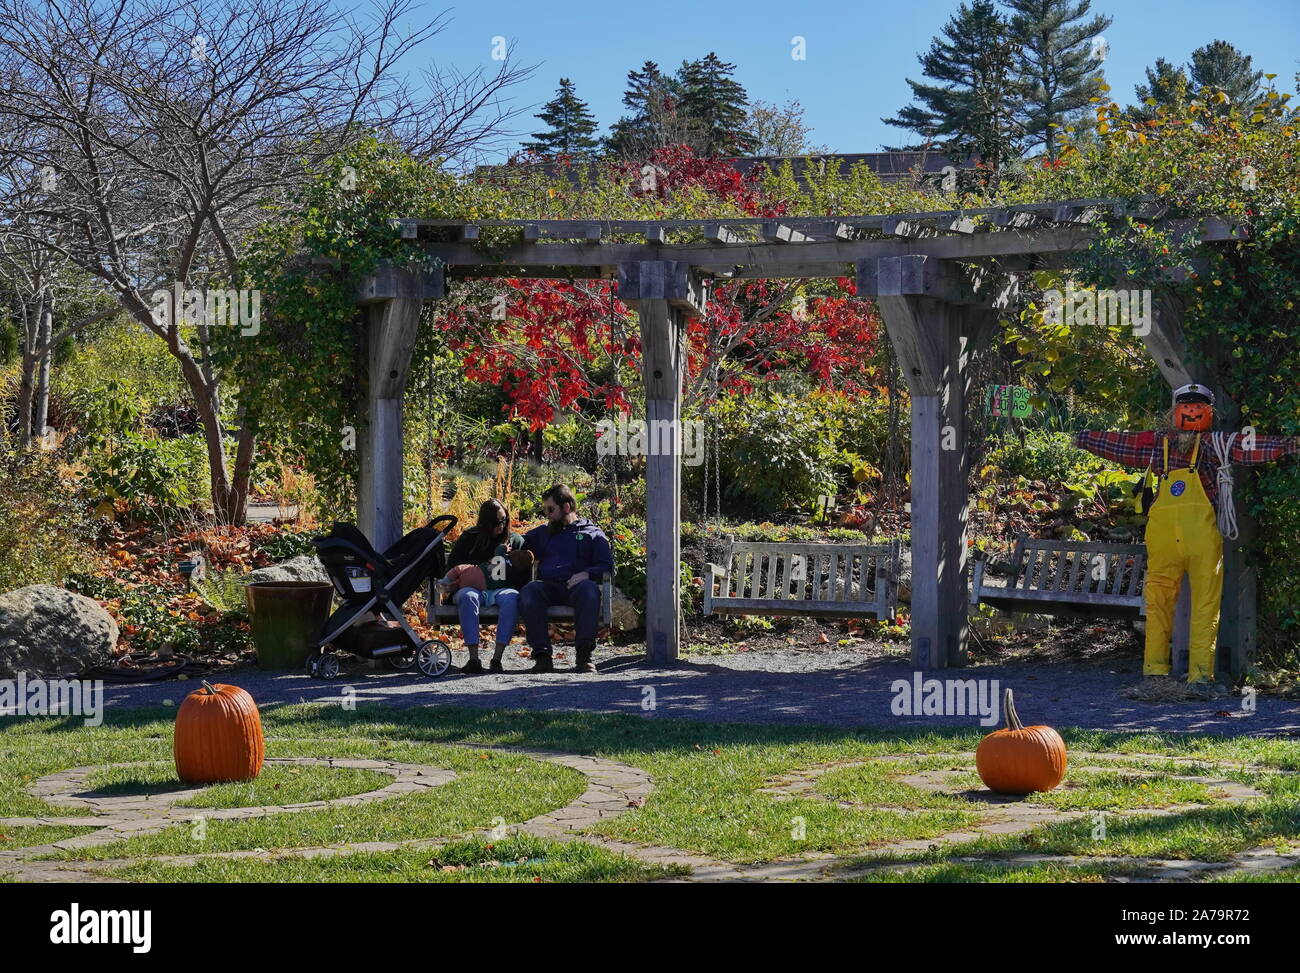 Boothbay, ME / USA - October 19, 2019: New couple spend time together with the baby on a swing in Coastal Maine Botanical Gardens Stock Photo